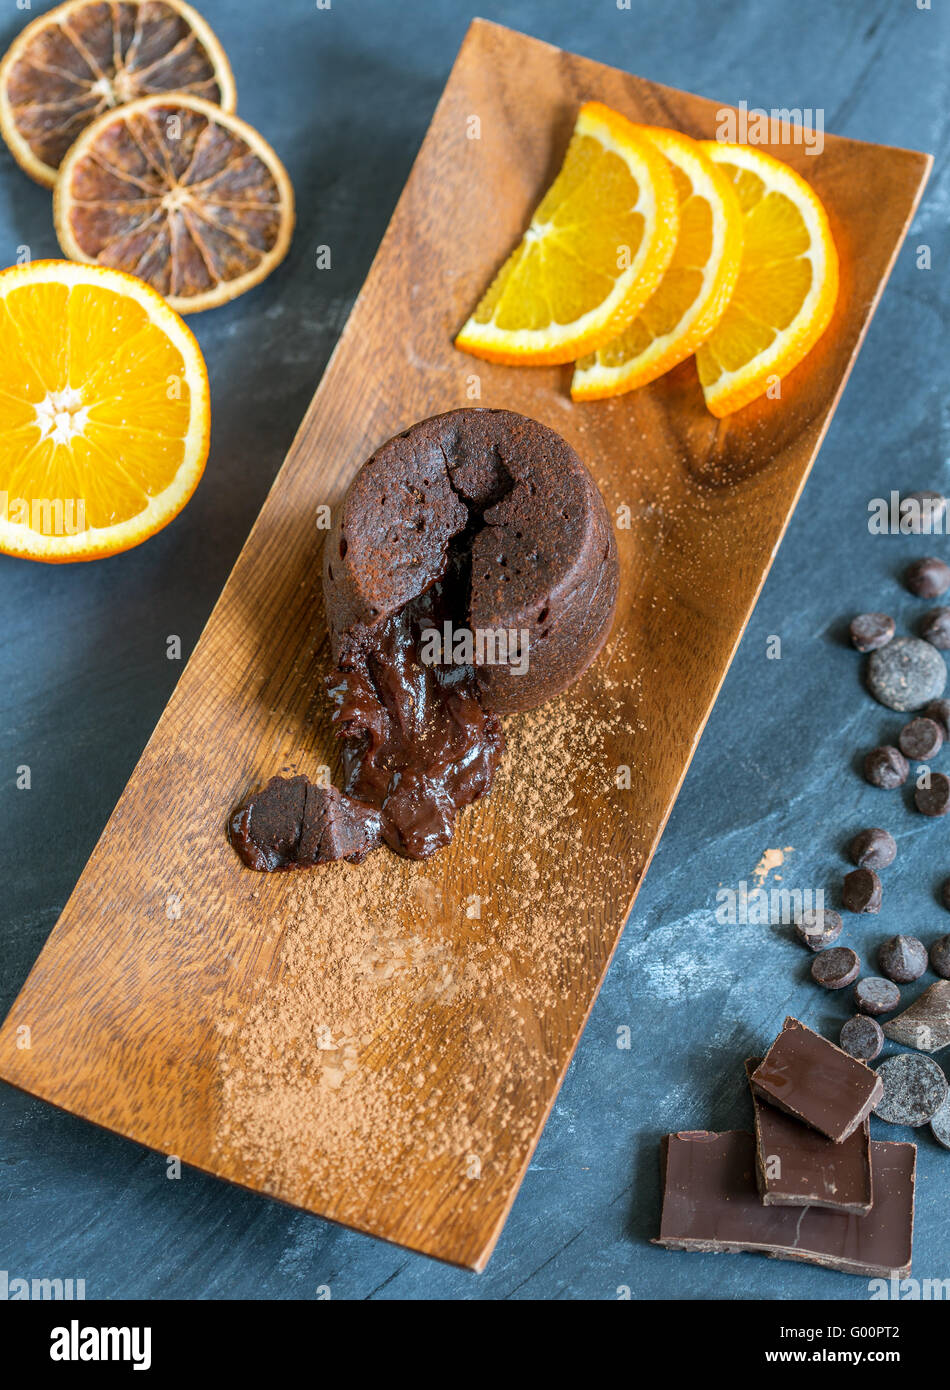 Chocolate fondant. View from above. Stock Photo